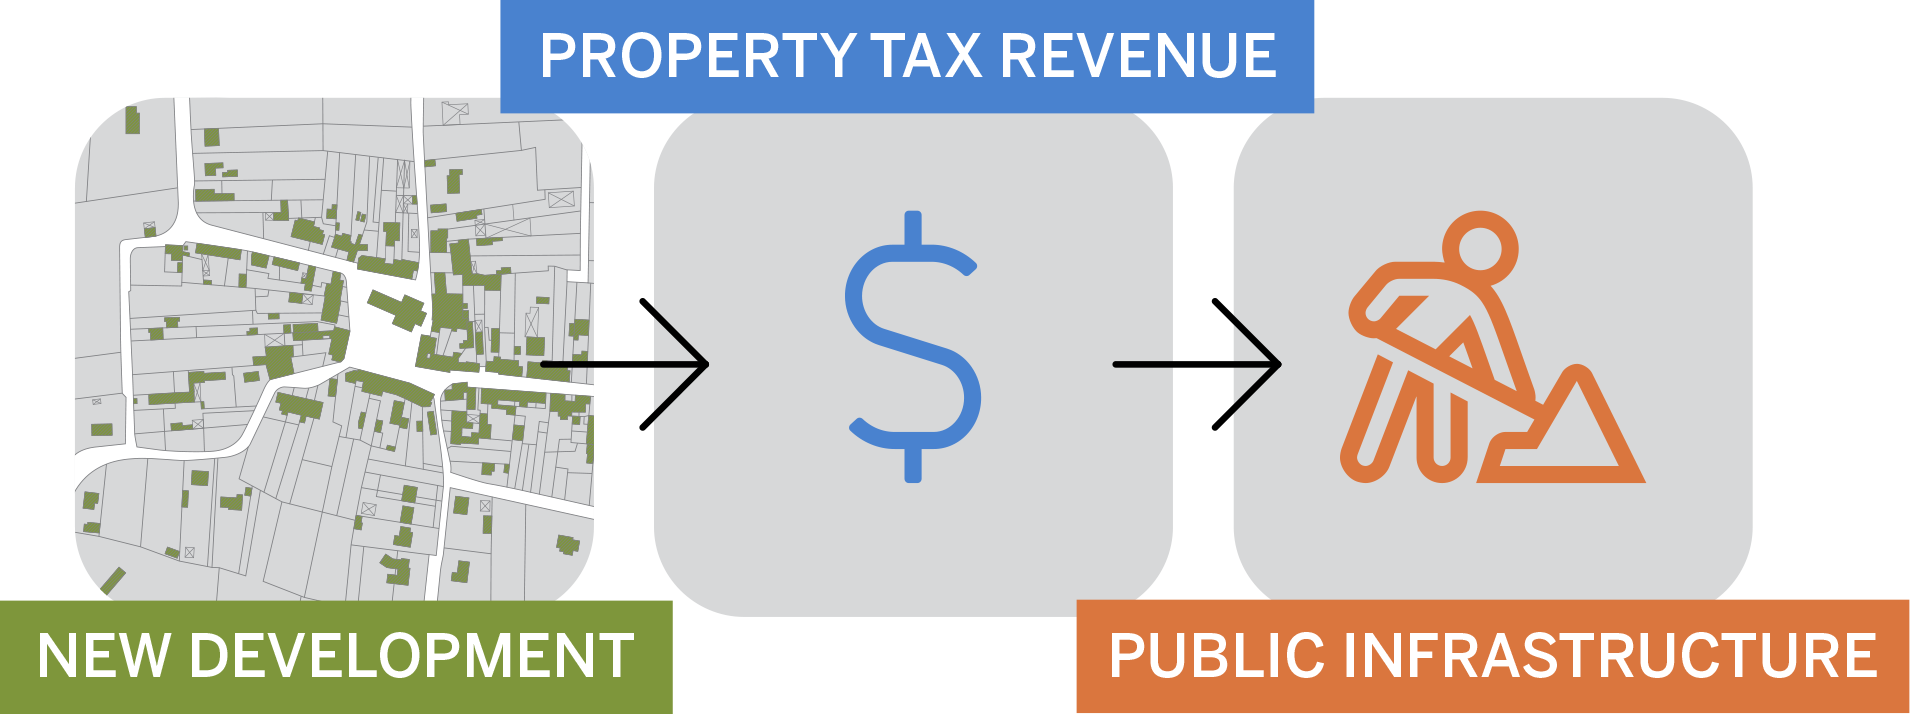 Infographic showing that TIF allows local governments to create districts where the property tax revenue from new development is used to pay for public infrastructure and other improvements